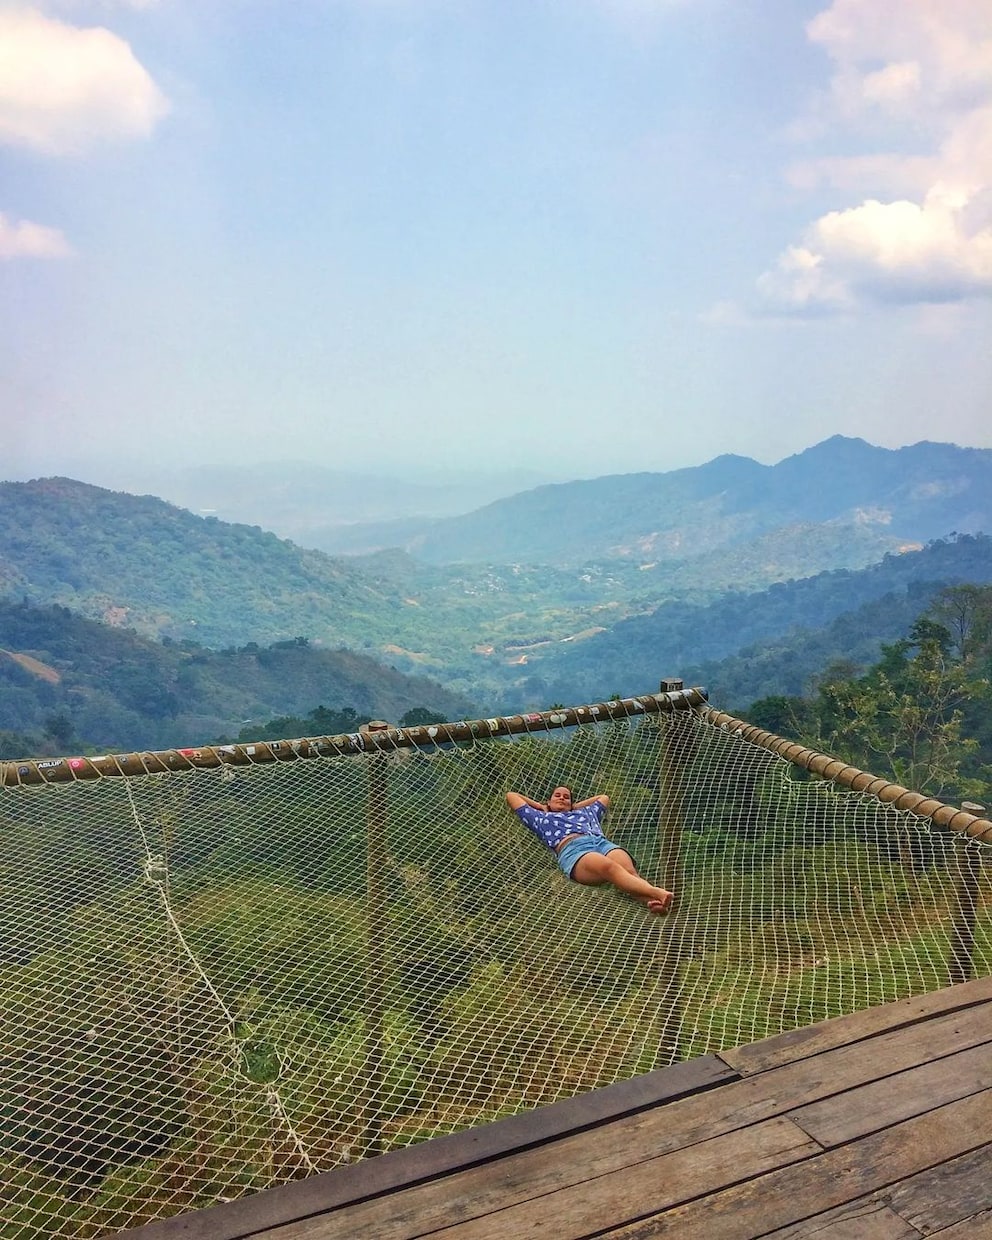 From the giant hammock, you can enjoy the breathtaking view of the mountains and a dreamy valley below the hostel «Casa Elemento».